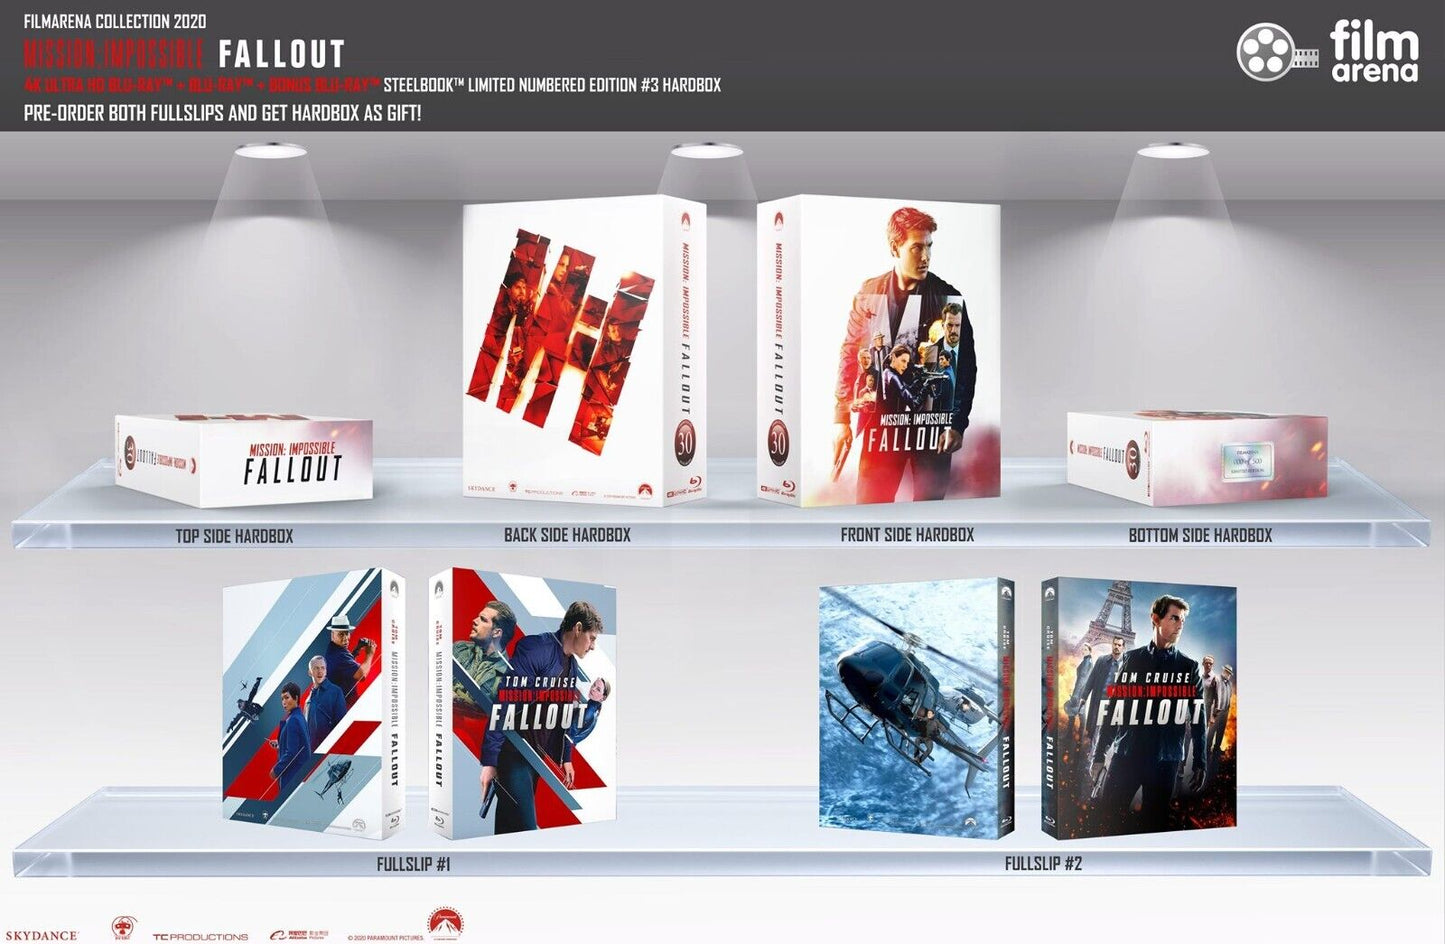 Mission: Impossible - Fallout 4K+2D Blu-ray Steelbook Filmarena Collection #132 Hard Box Set